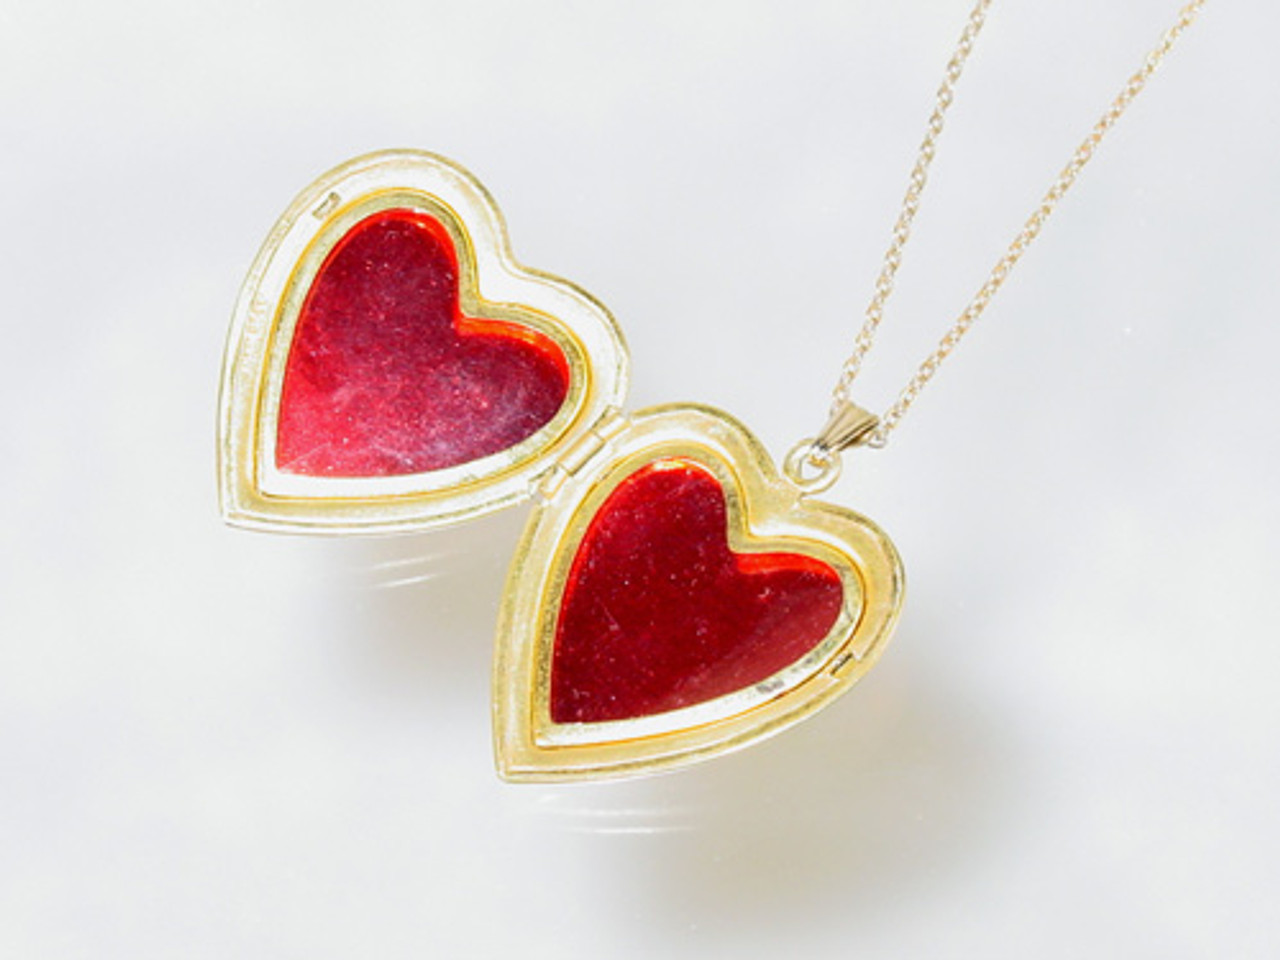 Heart shaped bezels and cellophane in locket